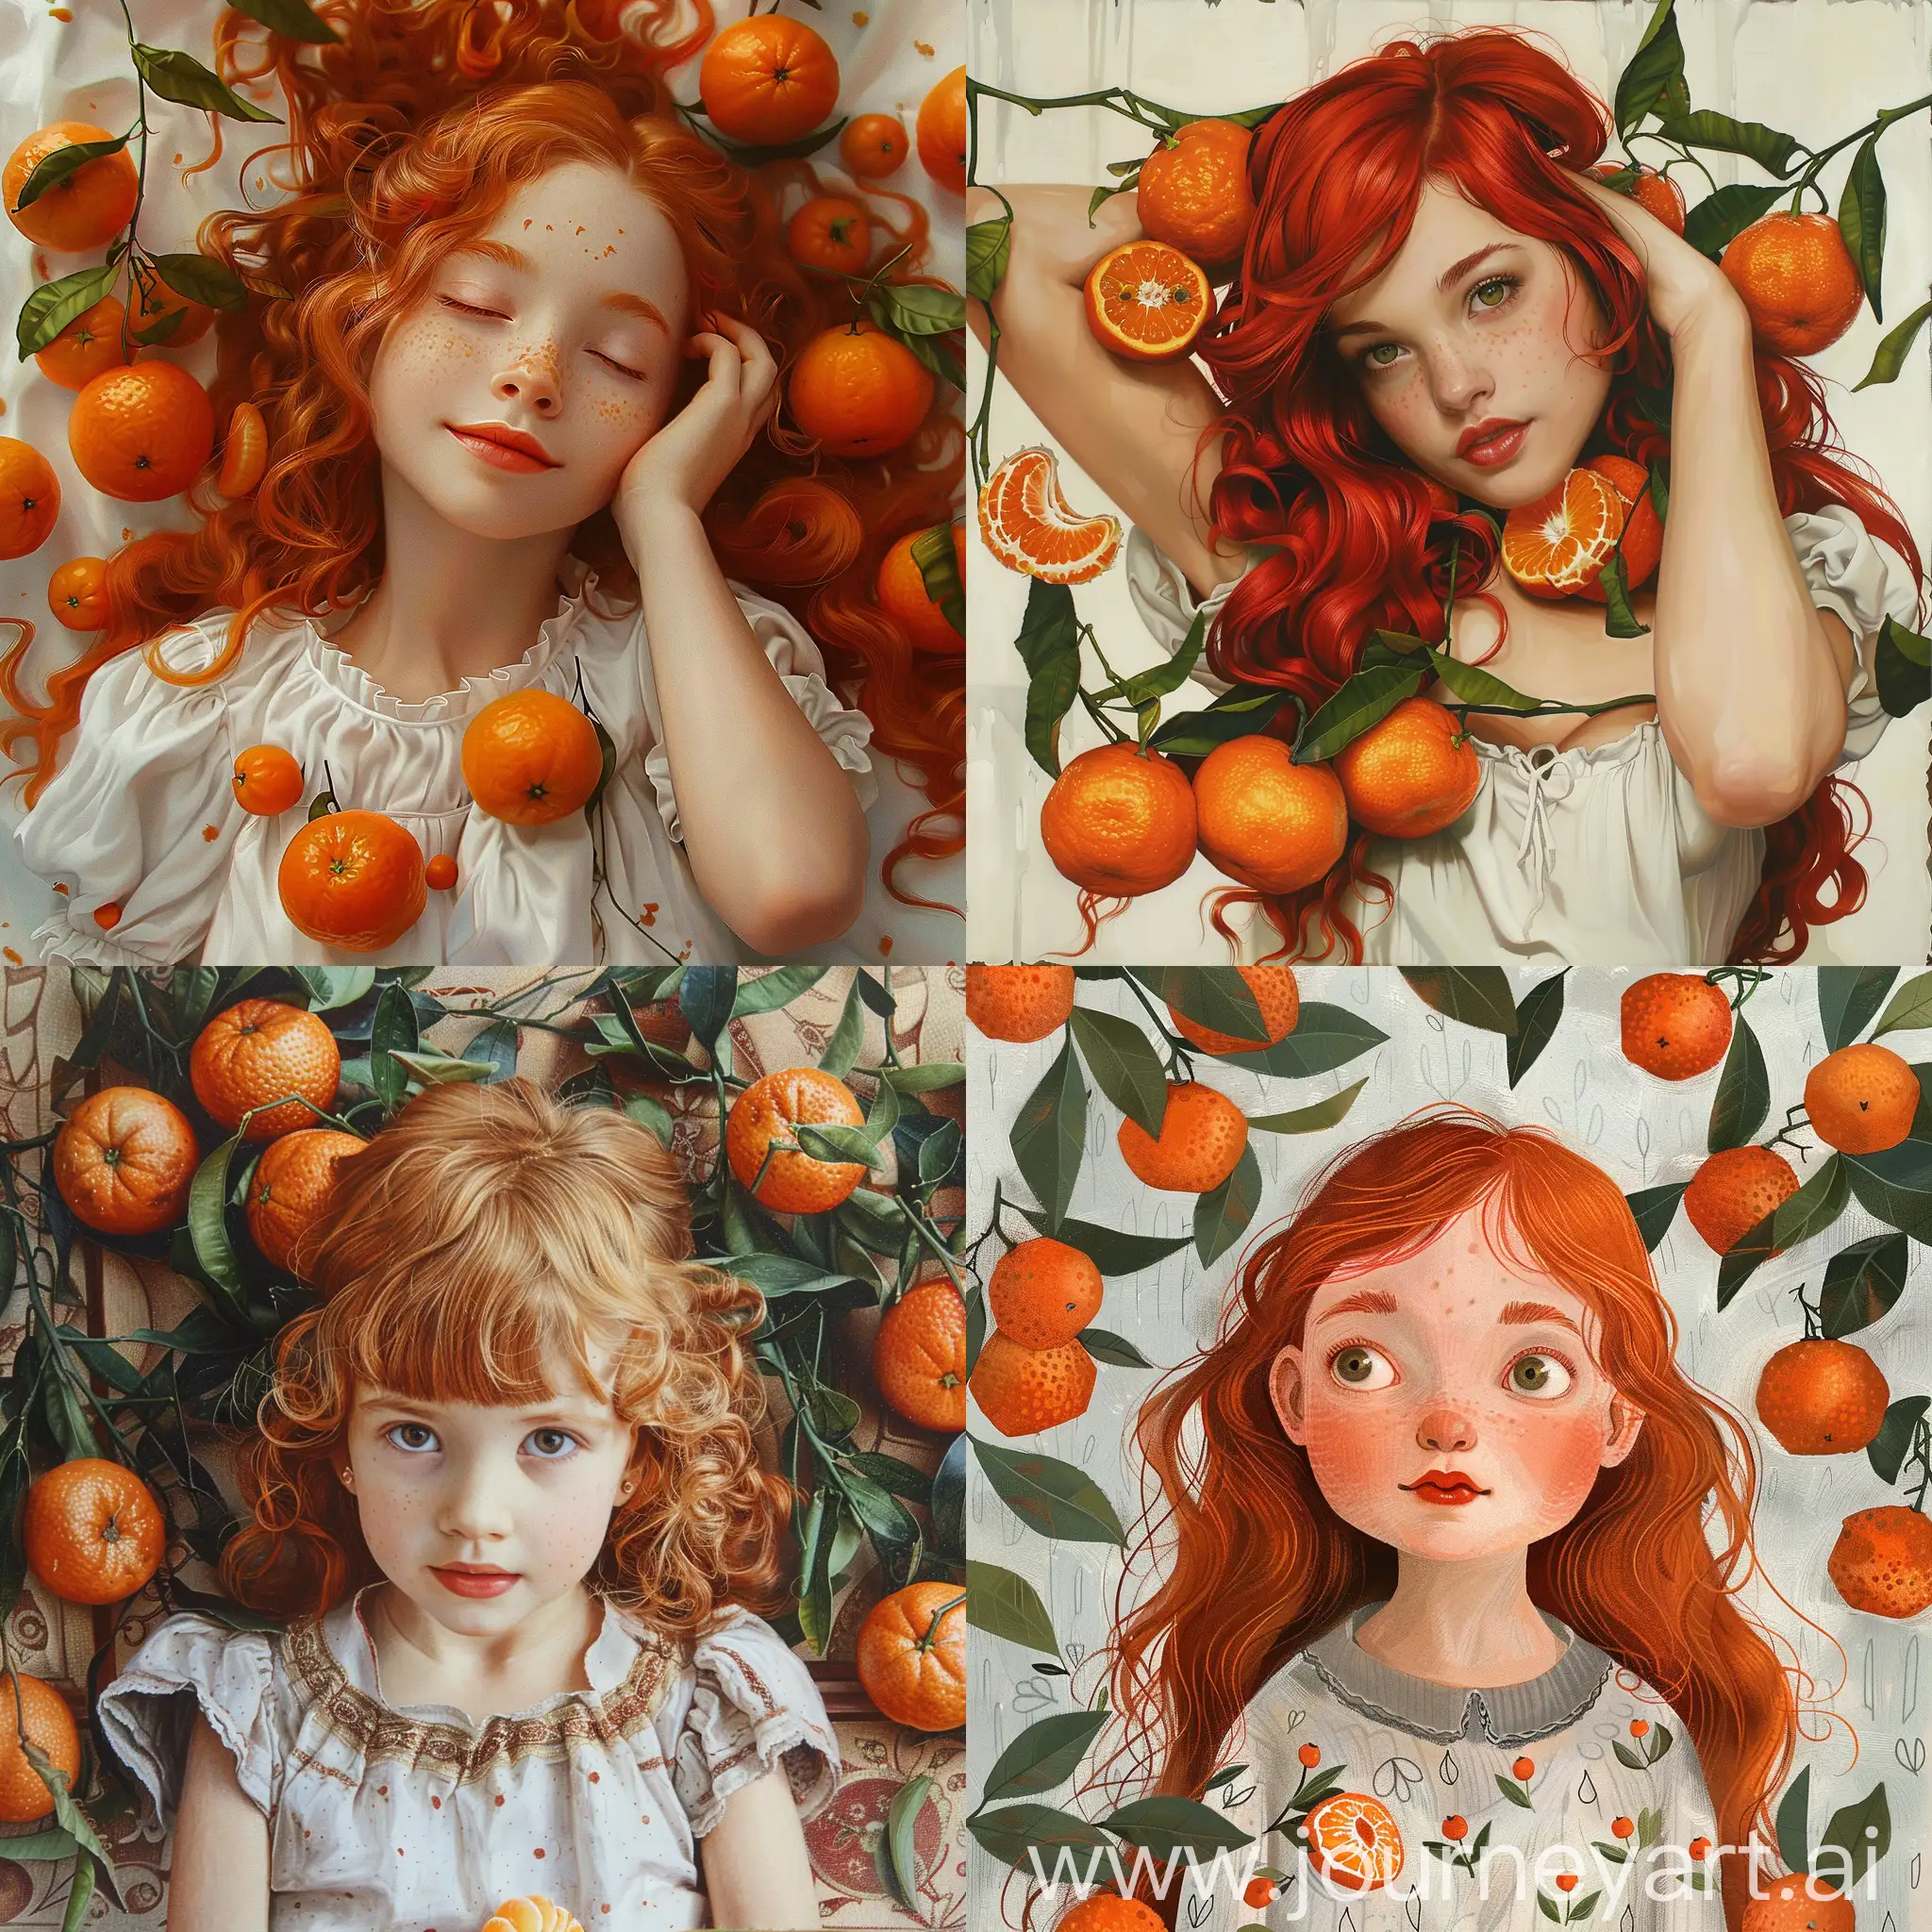 Vibrant-RedHaired-Girl-with-Mandarins-A-Whimsical-Portrait